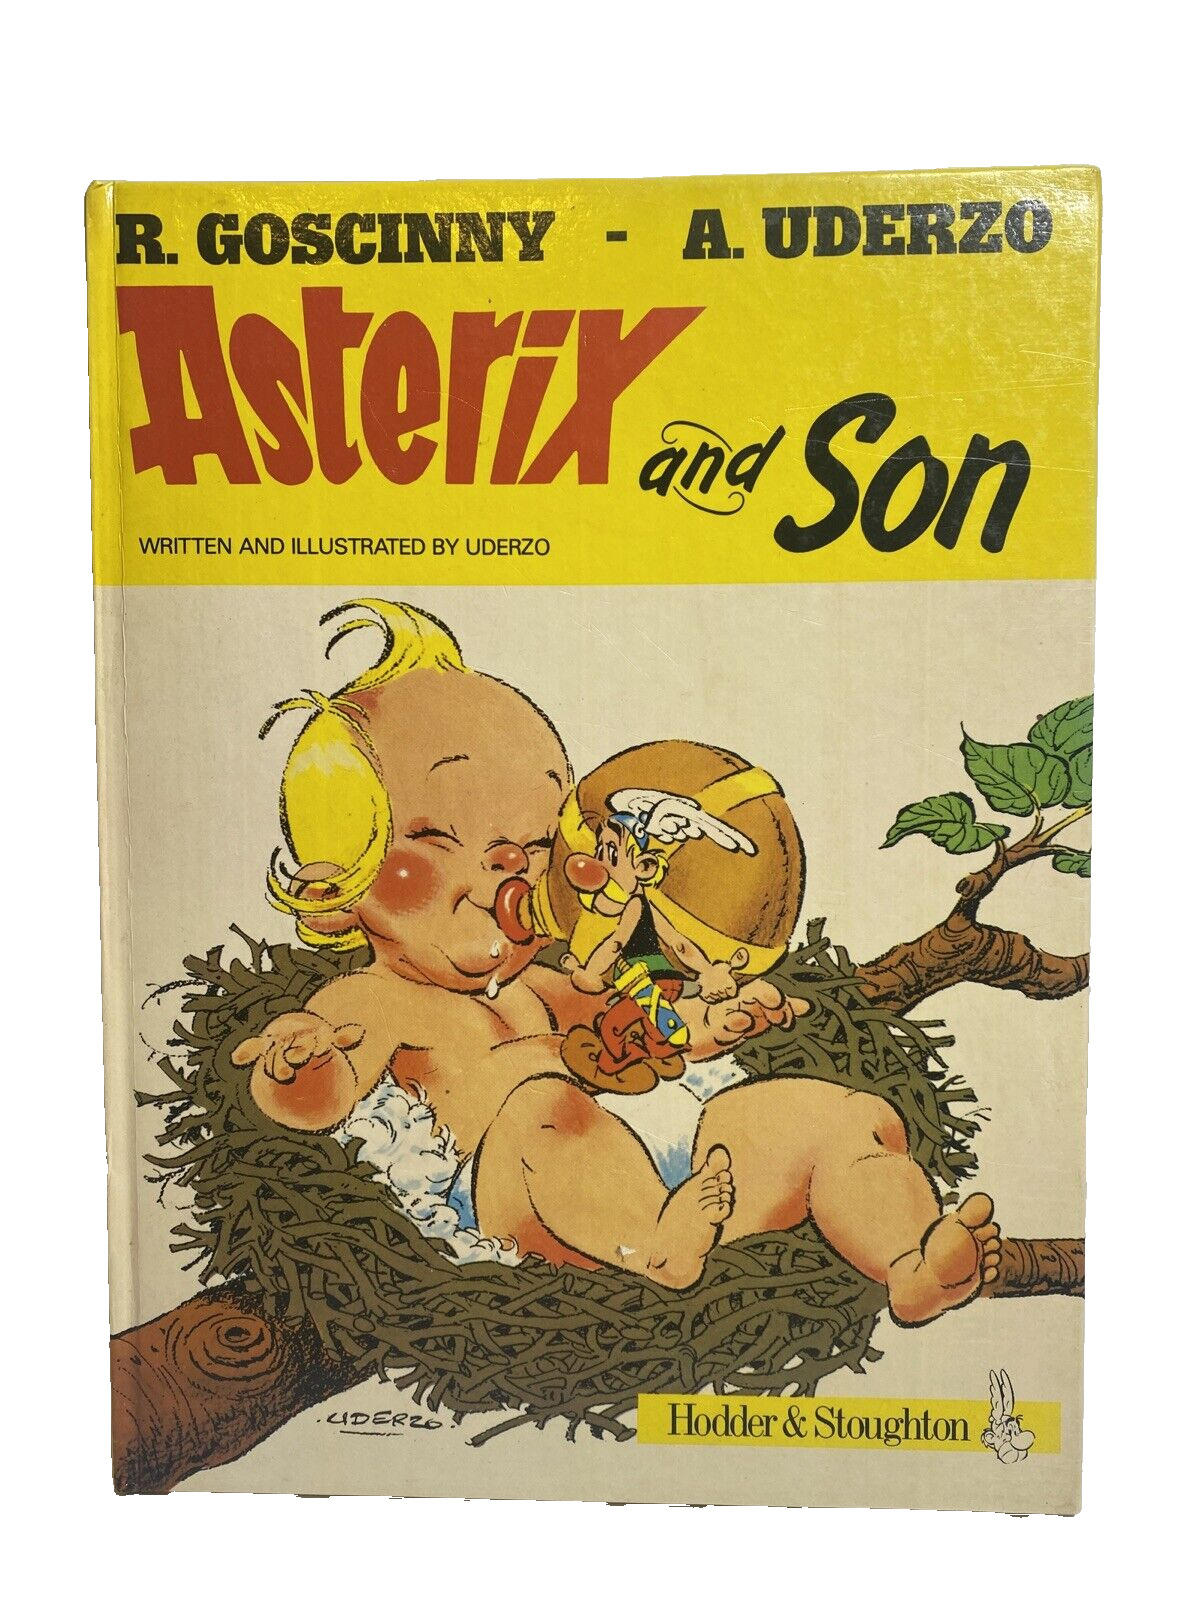 Asterix and Son Goscinny Uderzo 1983 First UK Edition Good Condition